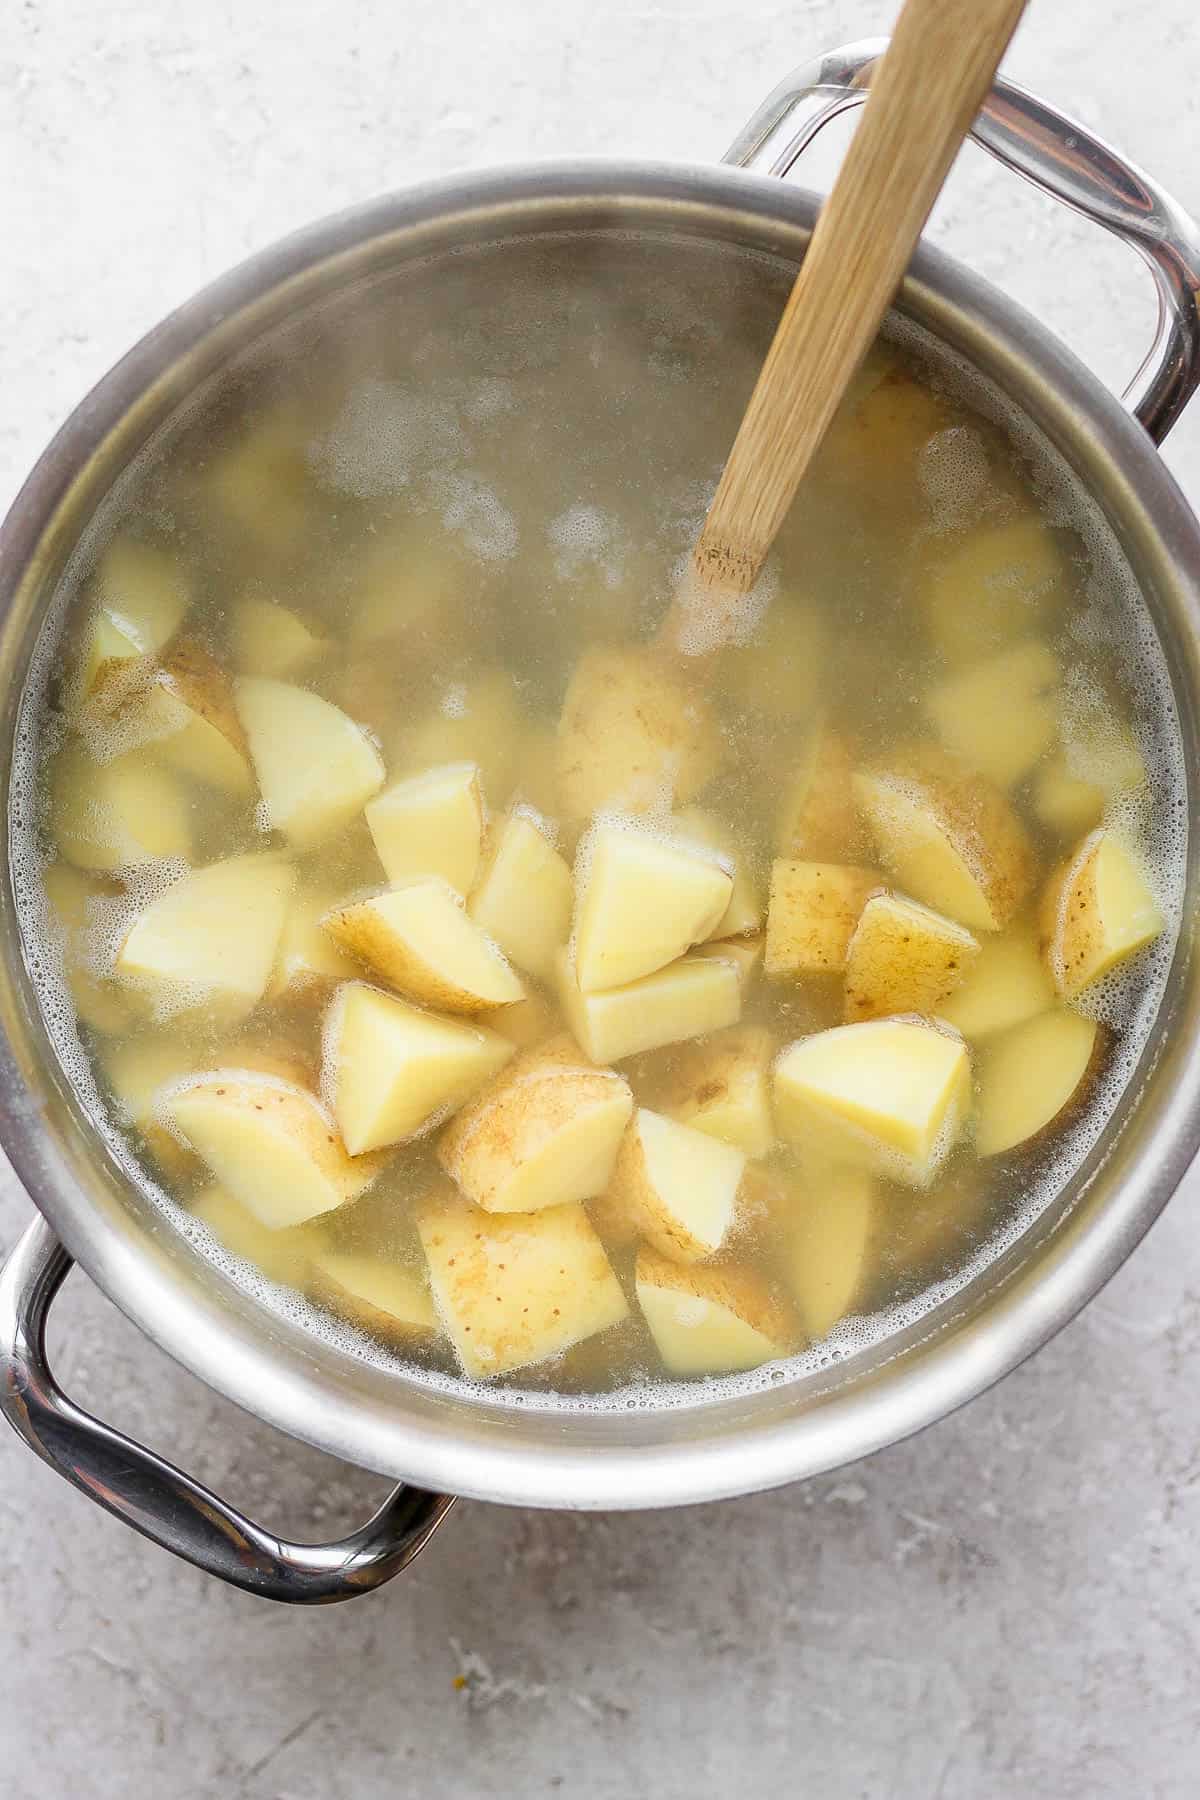 Quartered potatoes in a large stock pot with boiling water.